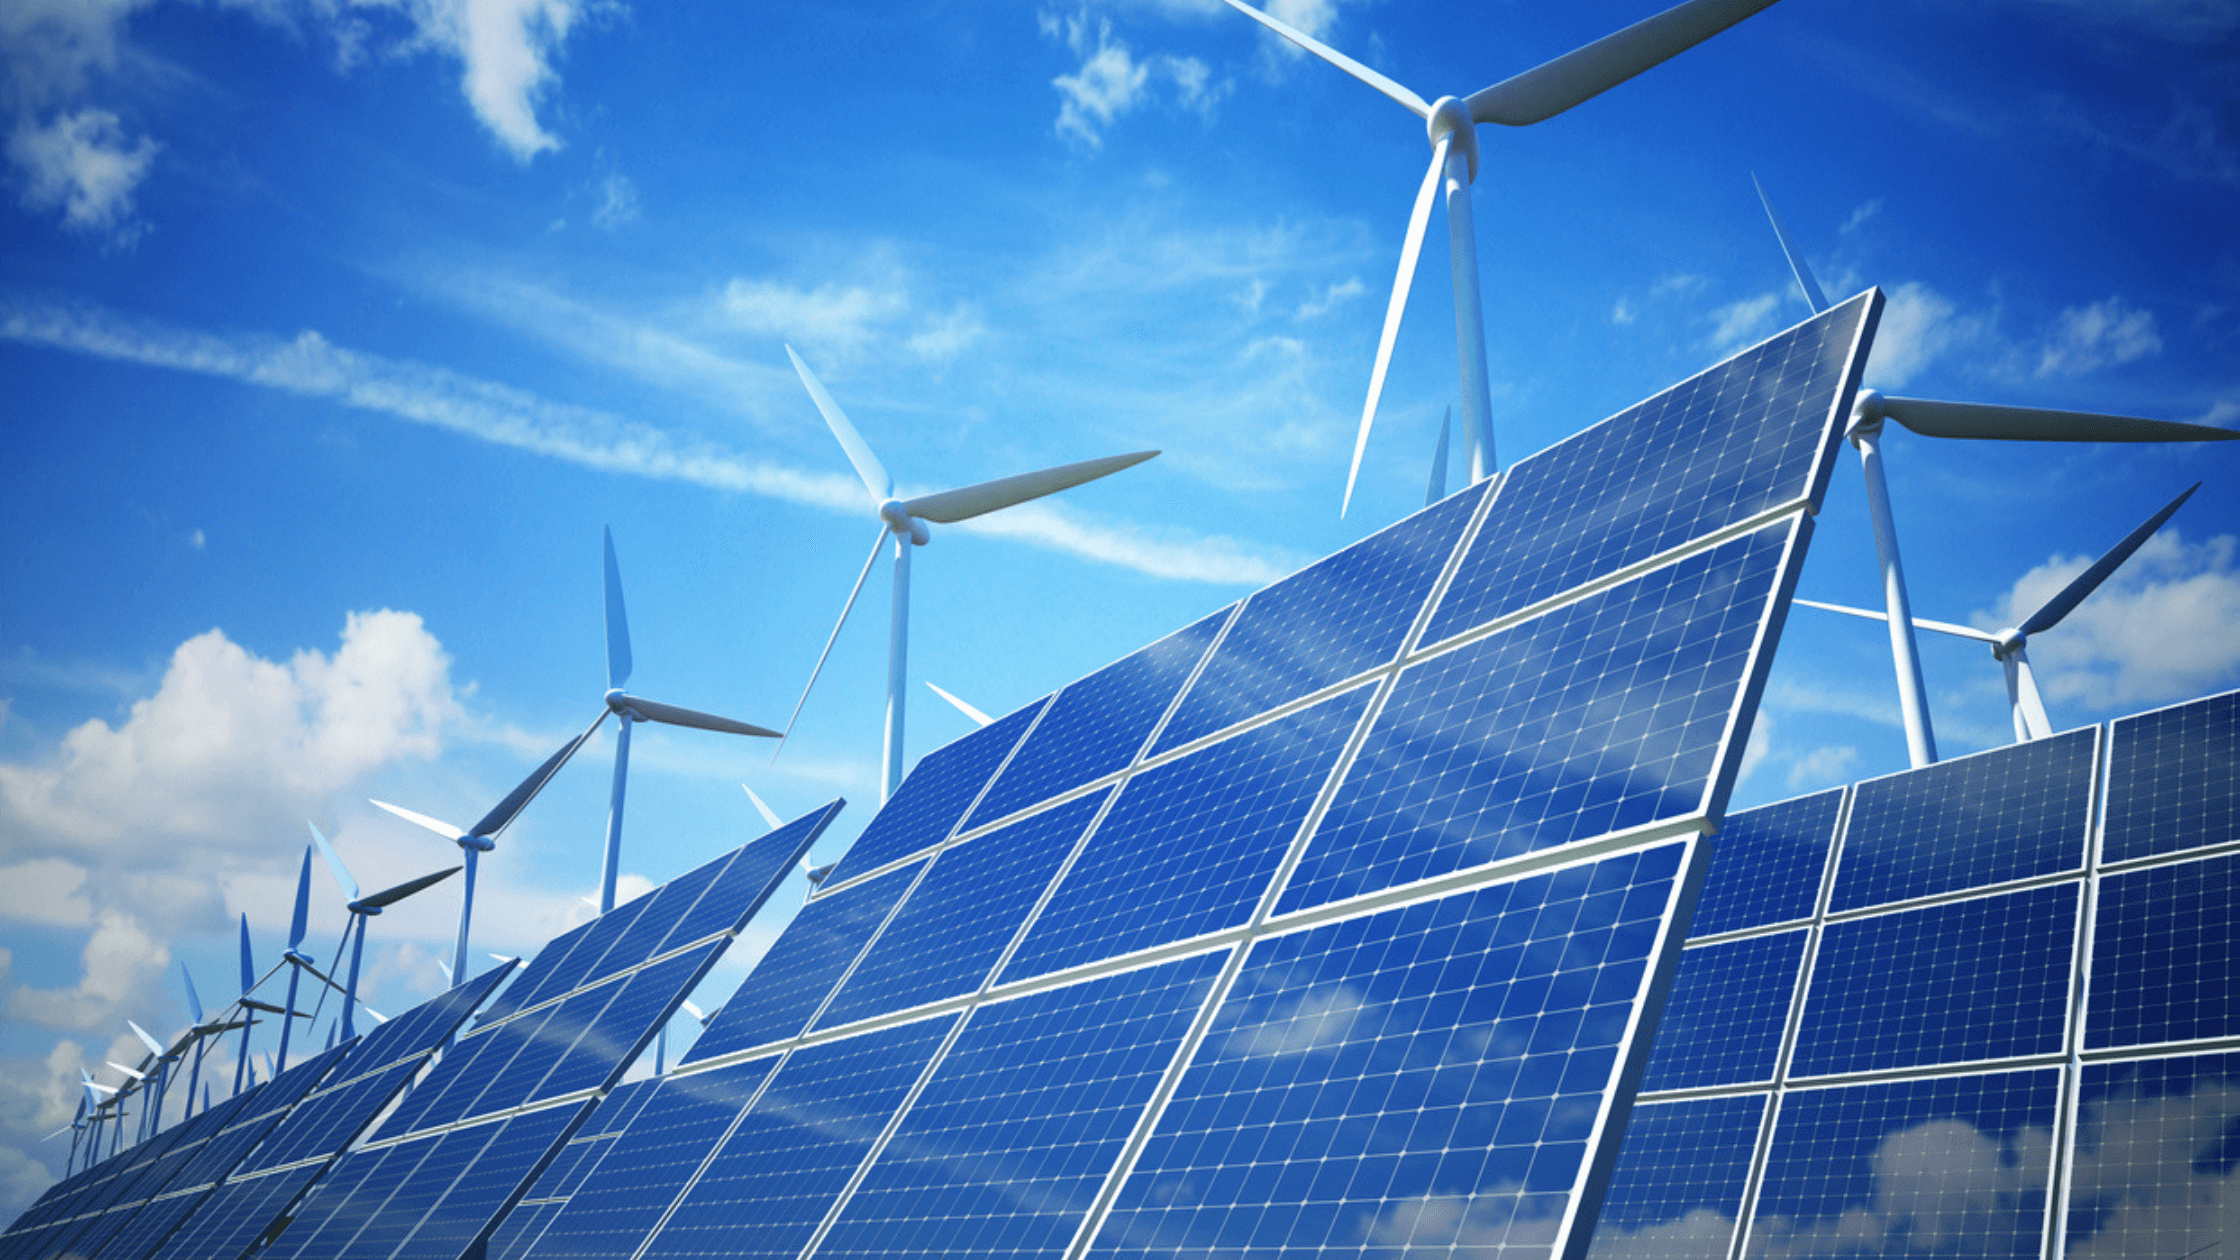 Clean energy dividend stocks